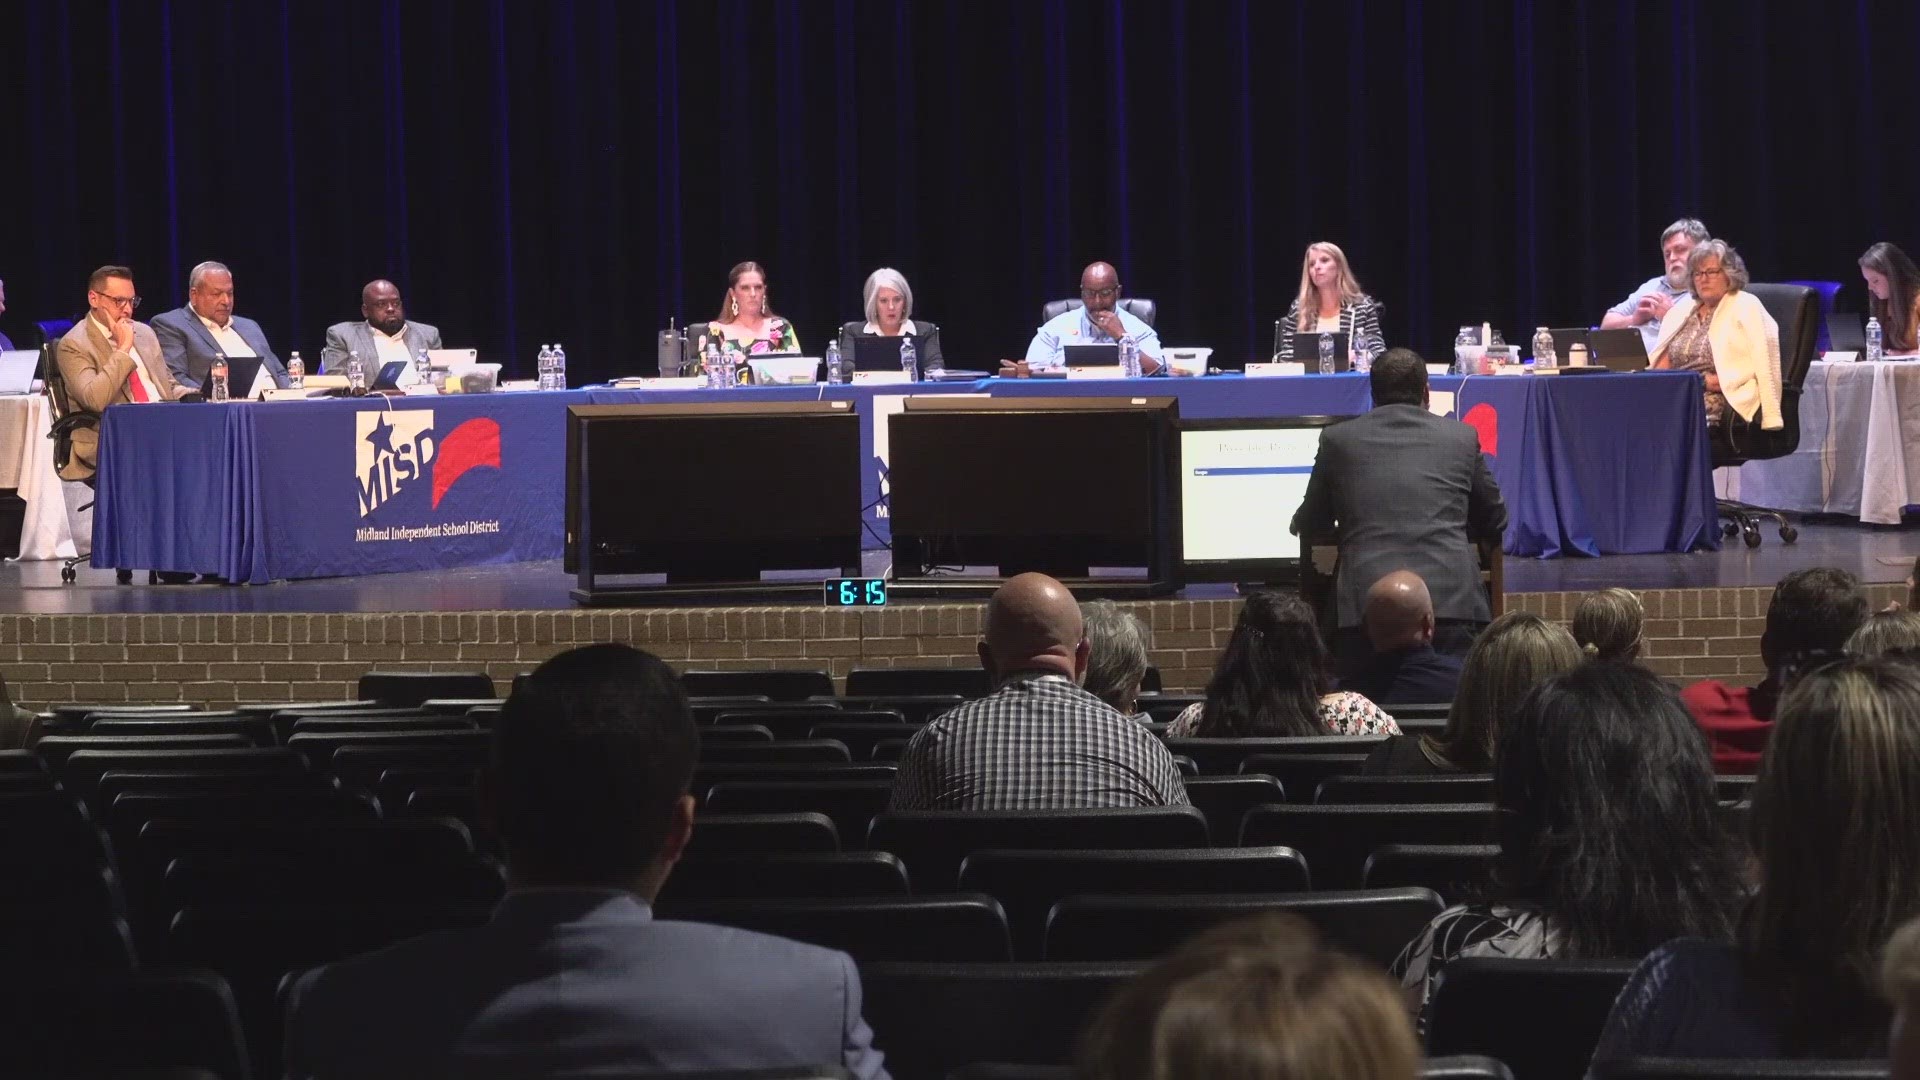 The committee shared their two propositions with the Midland ISD School Board during the latest meeting.